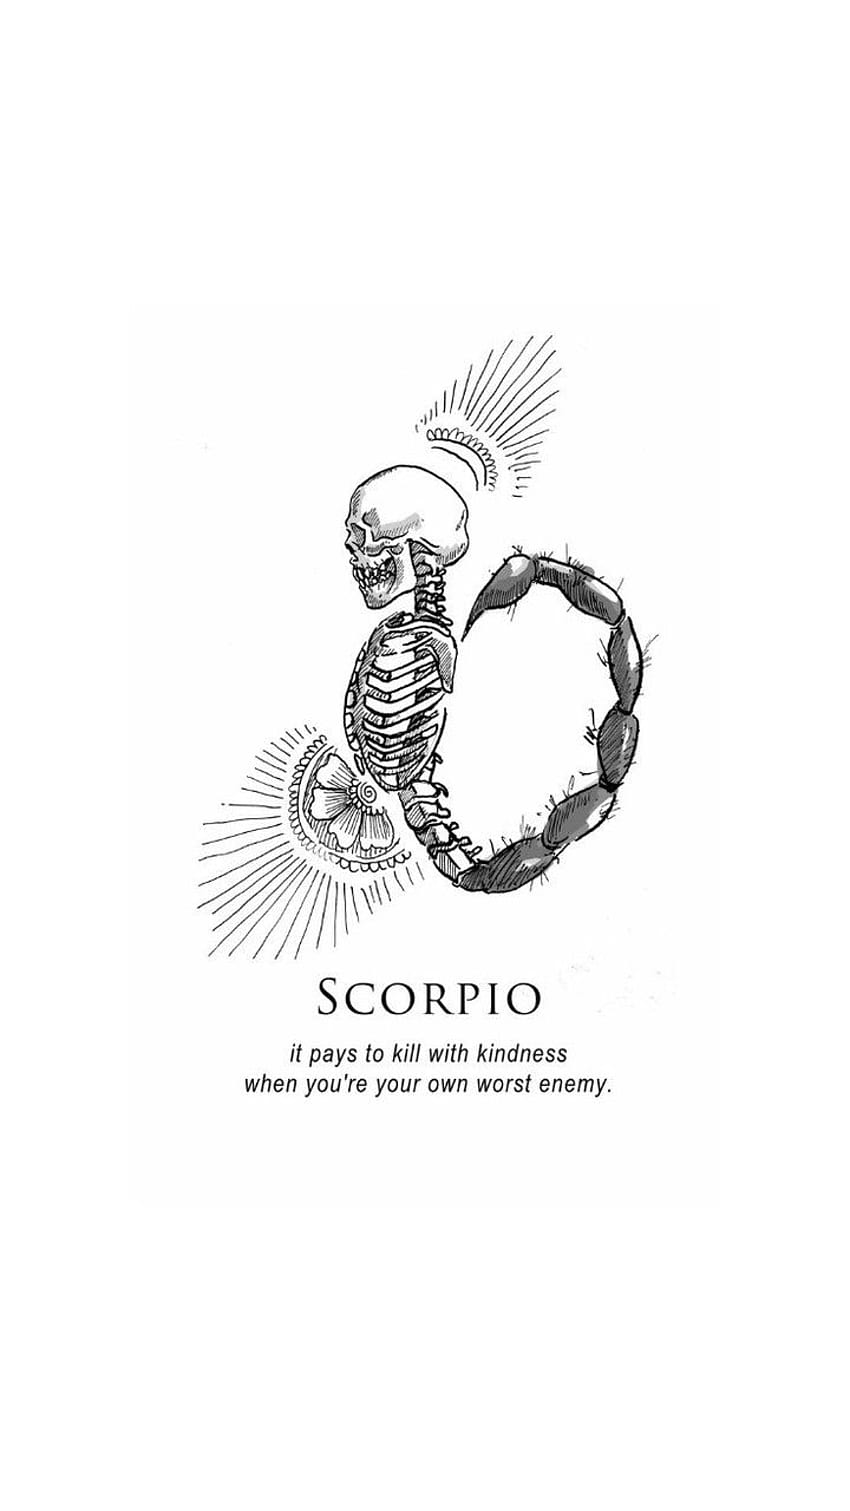 An illustration of a scorpion with the caption 